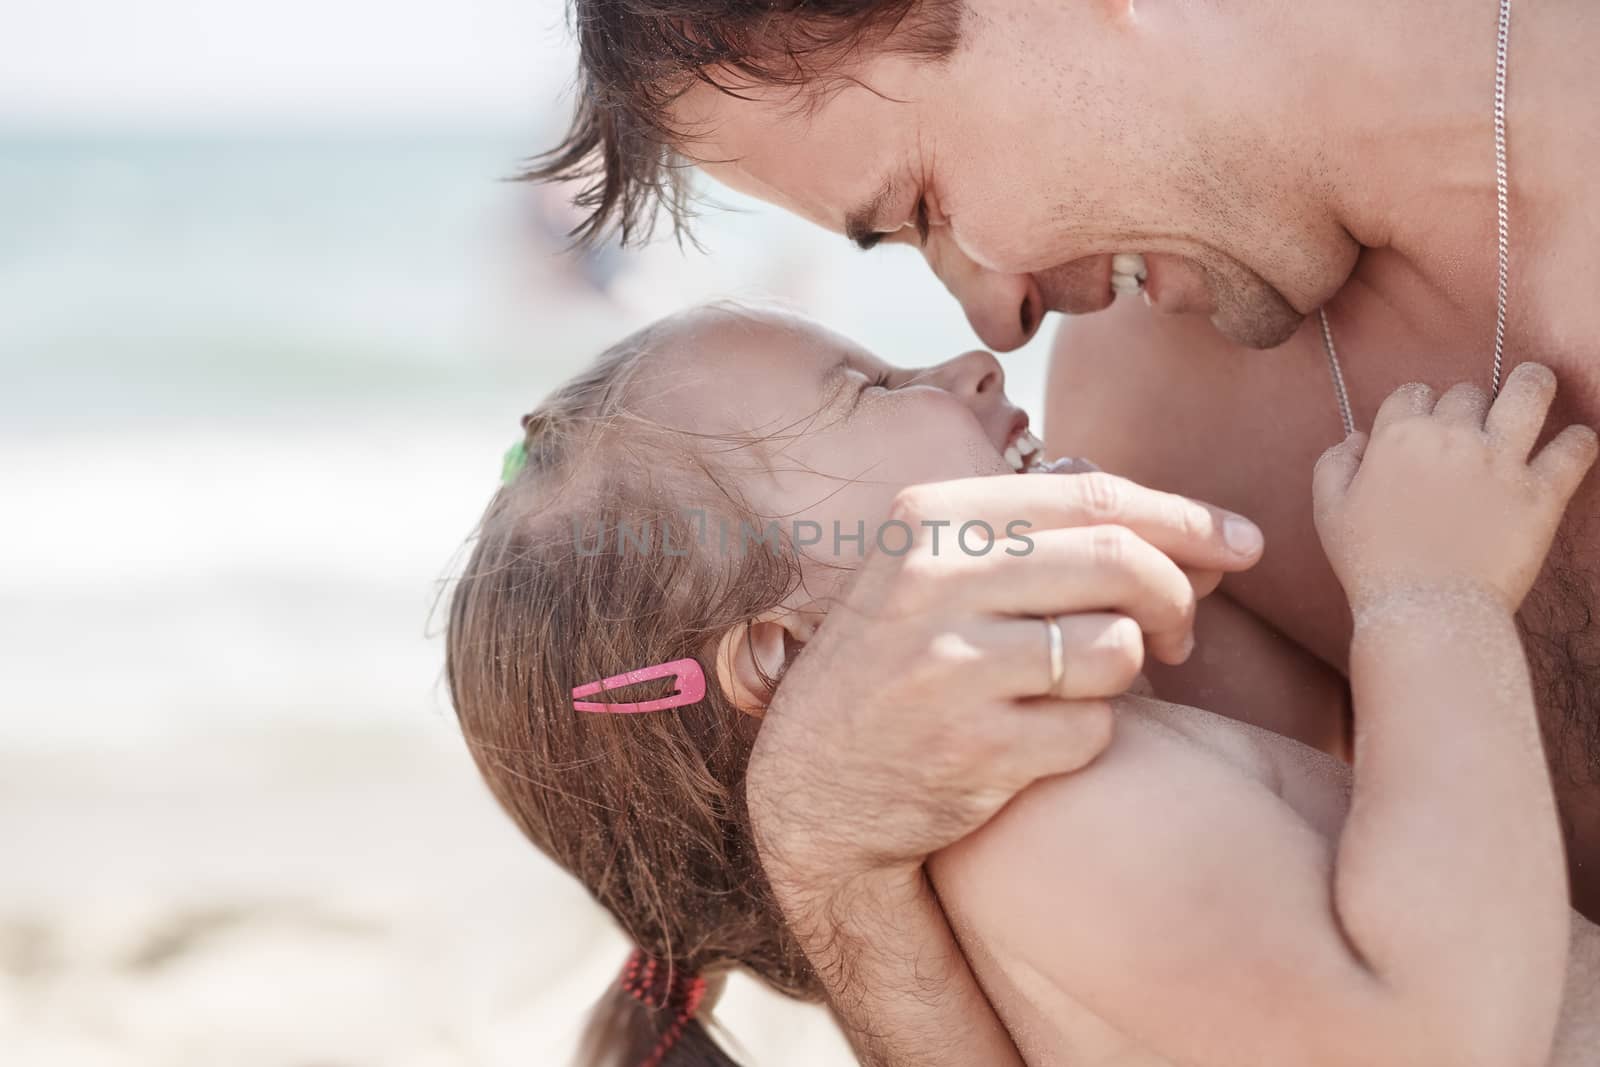 Dad and daughter embracing each other laugh. Closeup photo. Shallow depth of field.